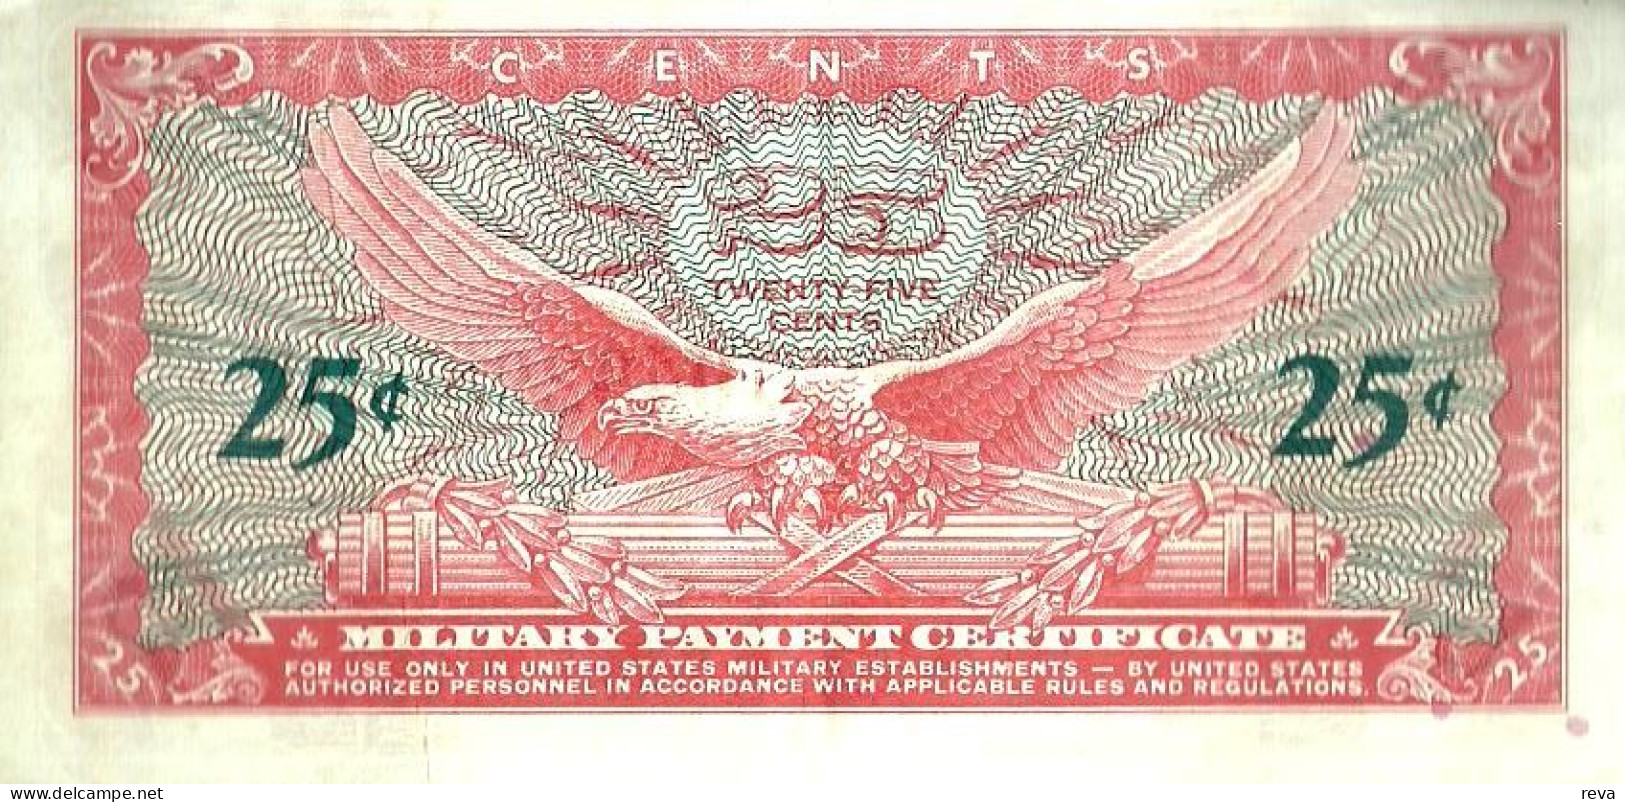 USA UNITED STATES 25 CENTS MILITARY CERTIFICATE RED WOMAN SERIES 641 VF ND(1965-68) PM59a READ DESCRIPTION CAREFULLY !! - 1965-1968 - Series 641